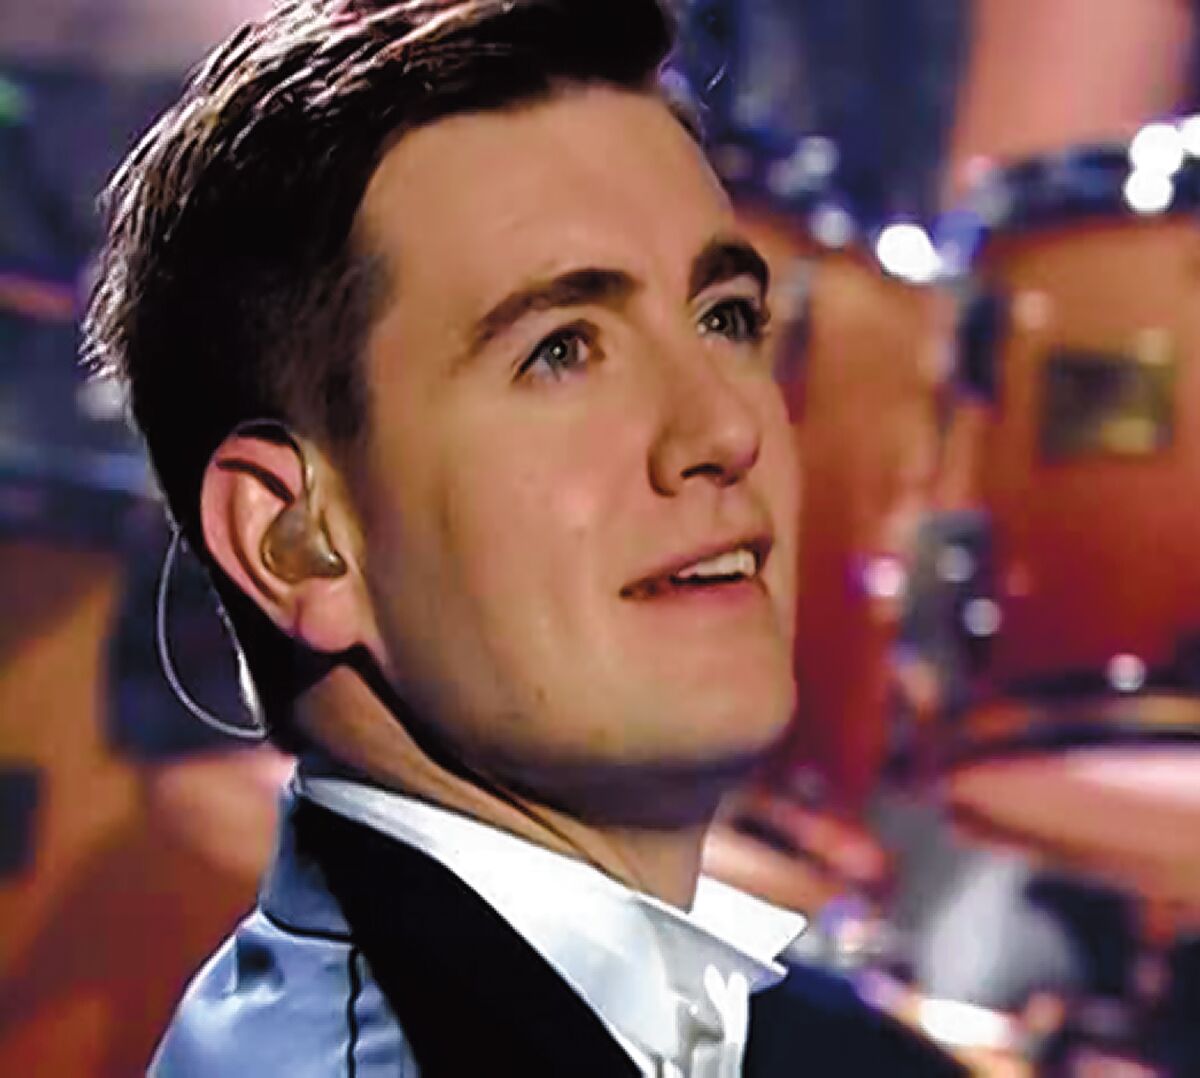 Celtic singer Emmet Cahill performs a Christmas concert, Dec. 6, 2019 at St. James by-the-Sea Episcopal Church in La Jolla.